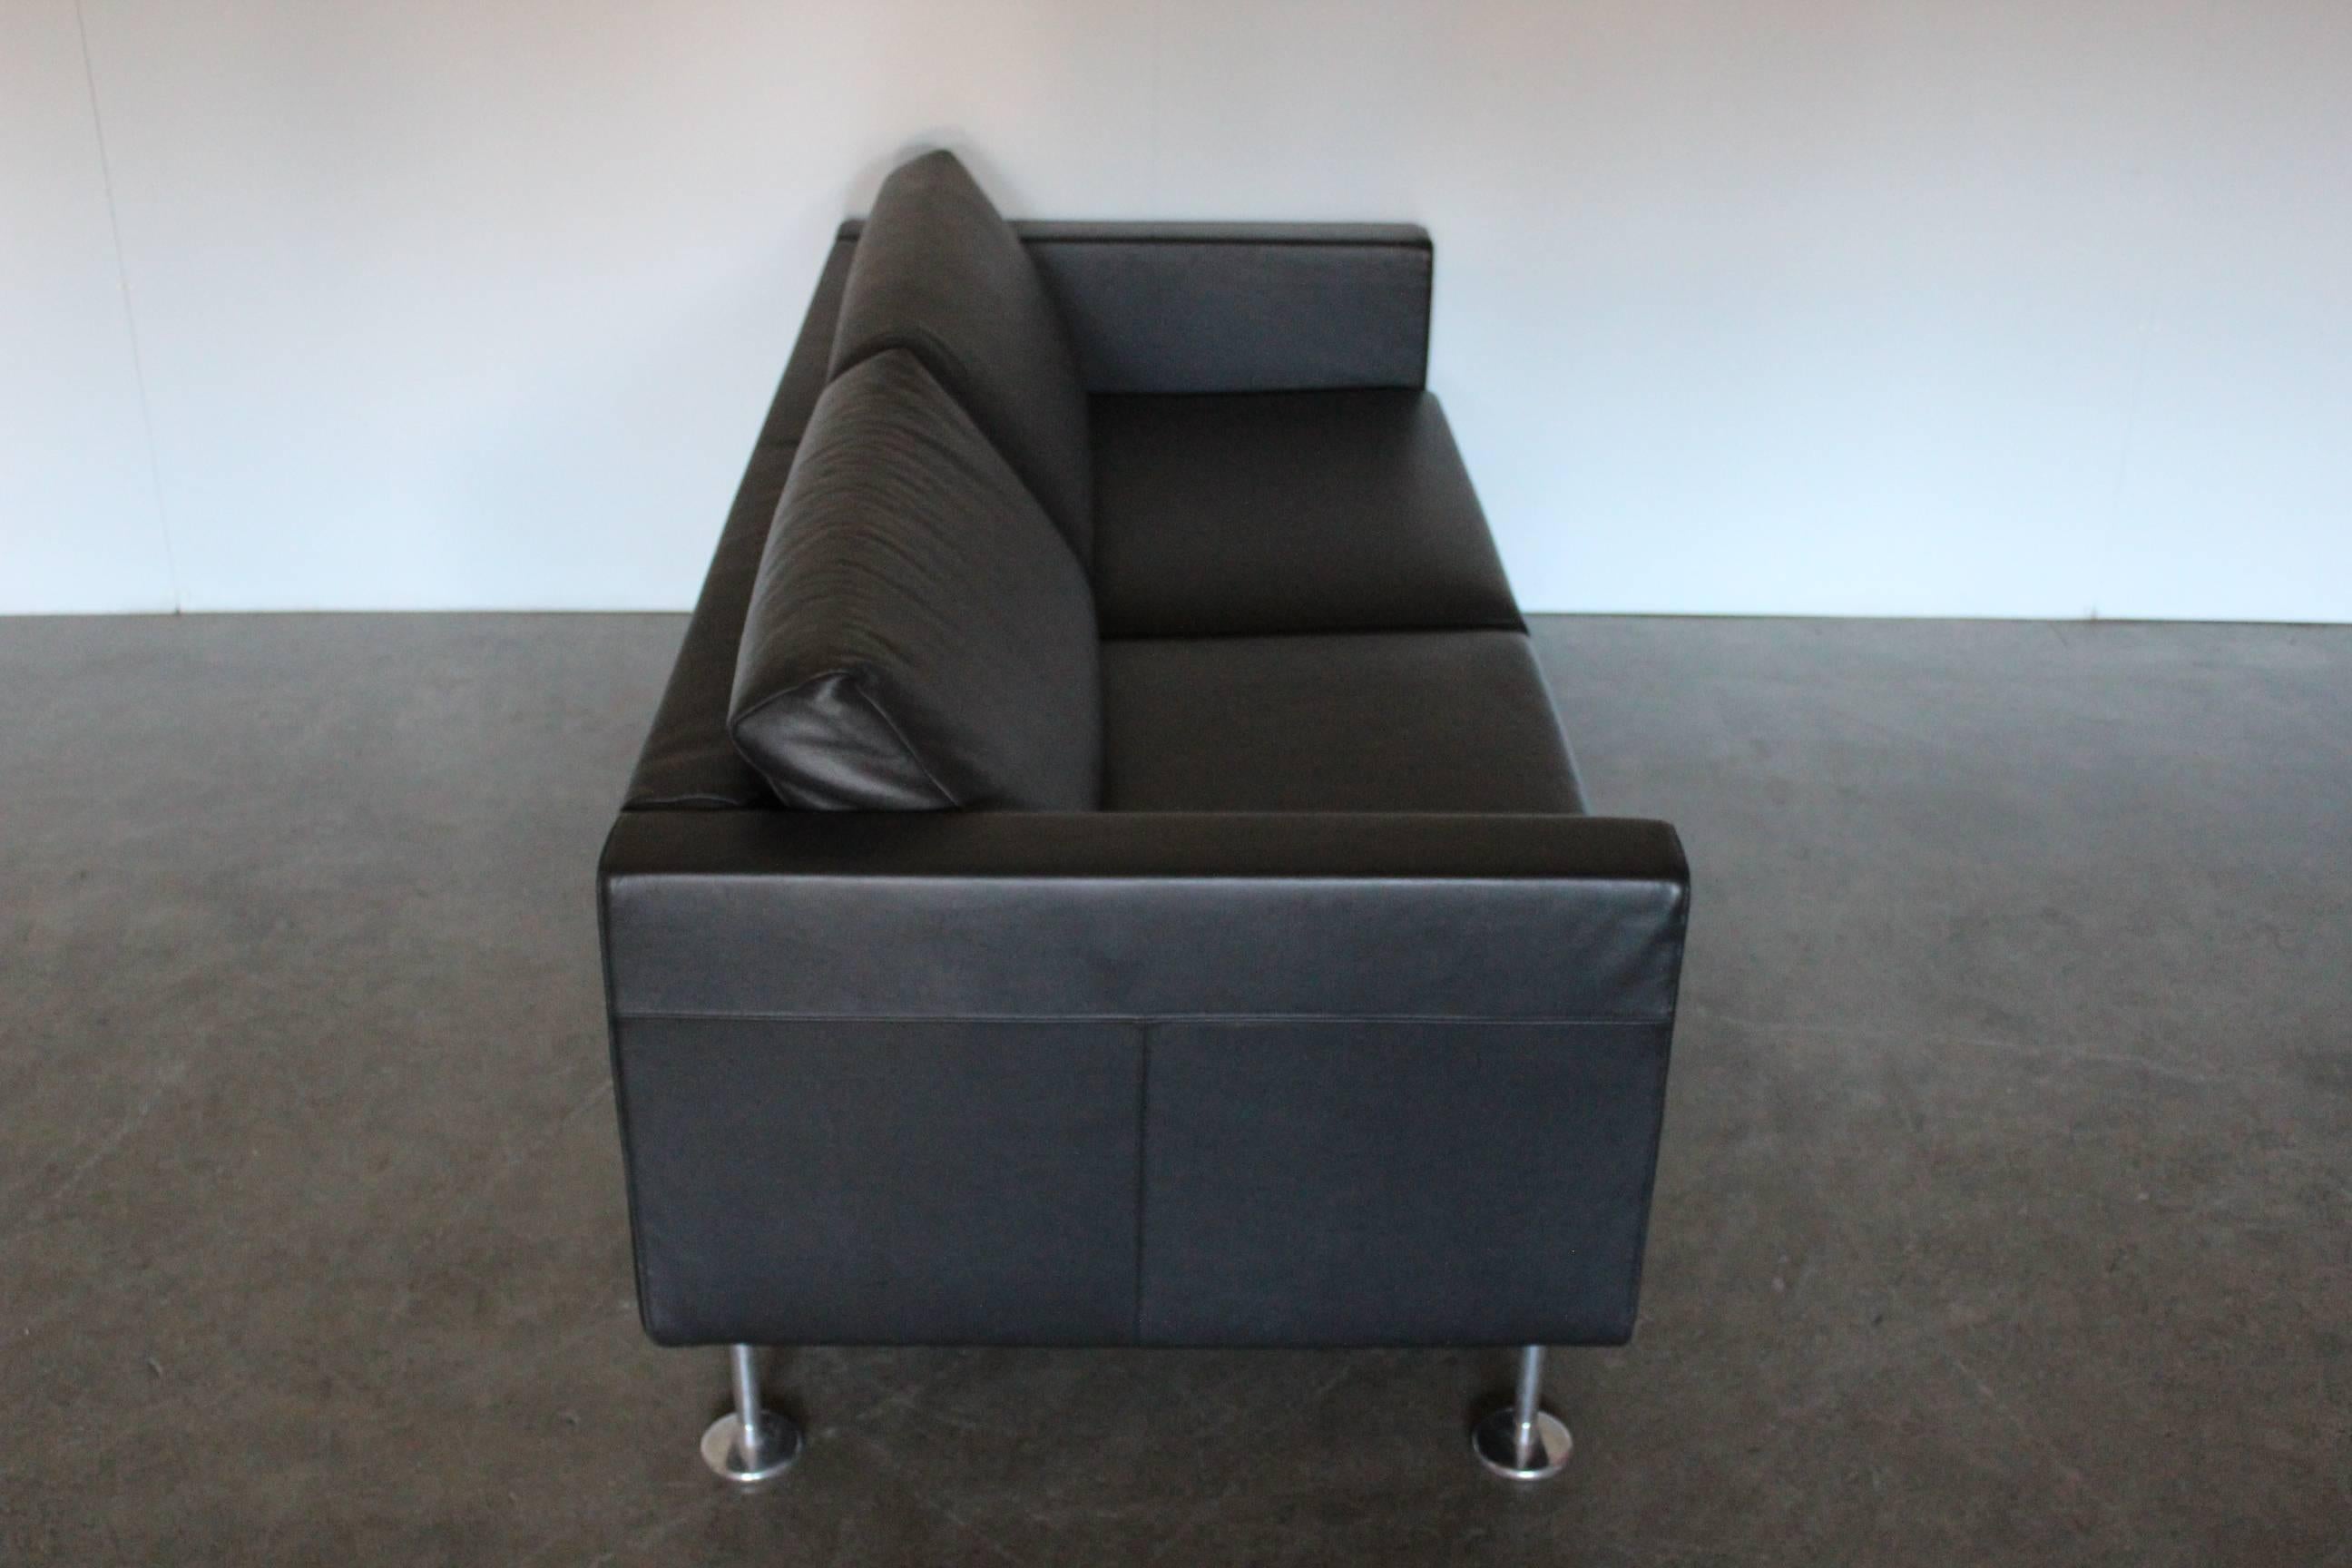 Hand-Crafted Vitra “Park” Three-Seat Sofa in Jet Black Leather by Jasper Morrison